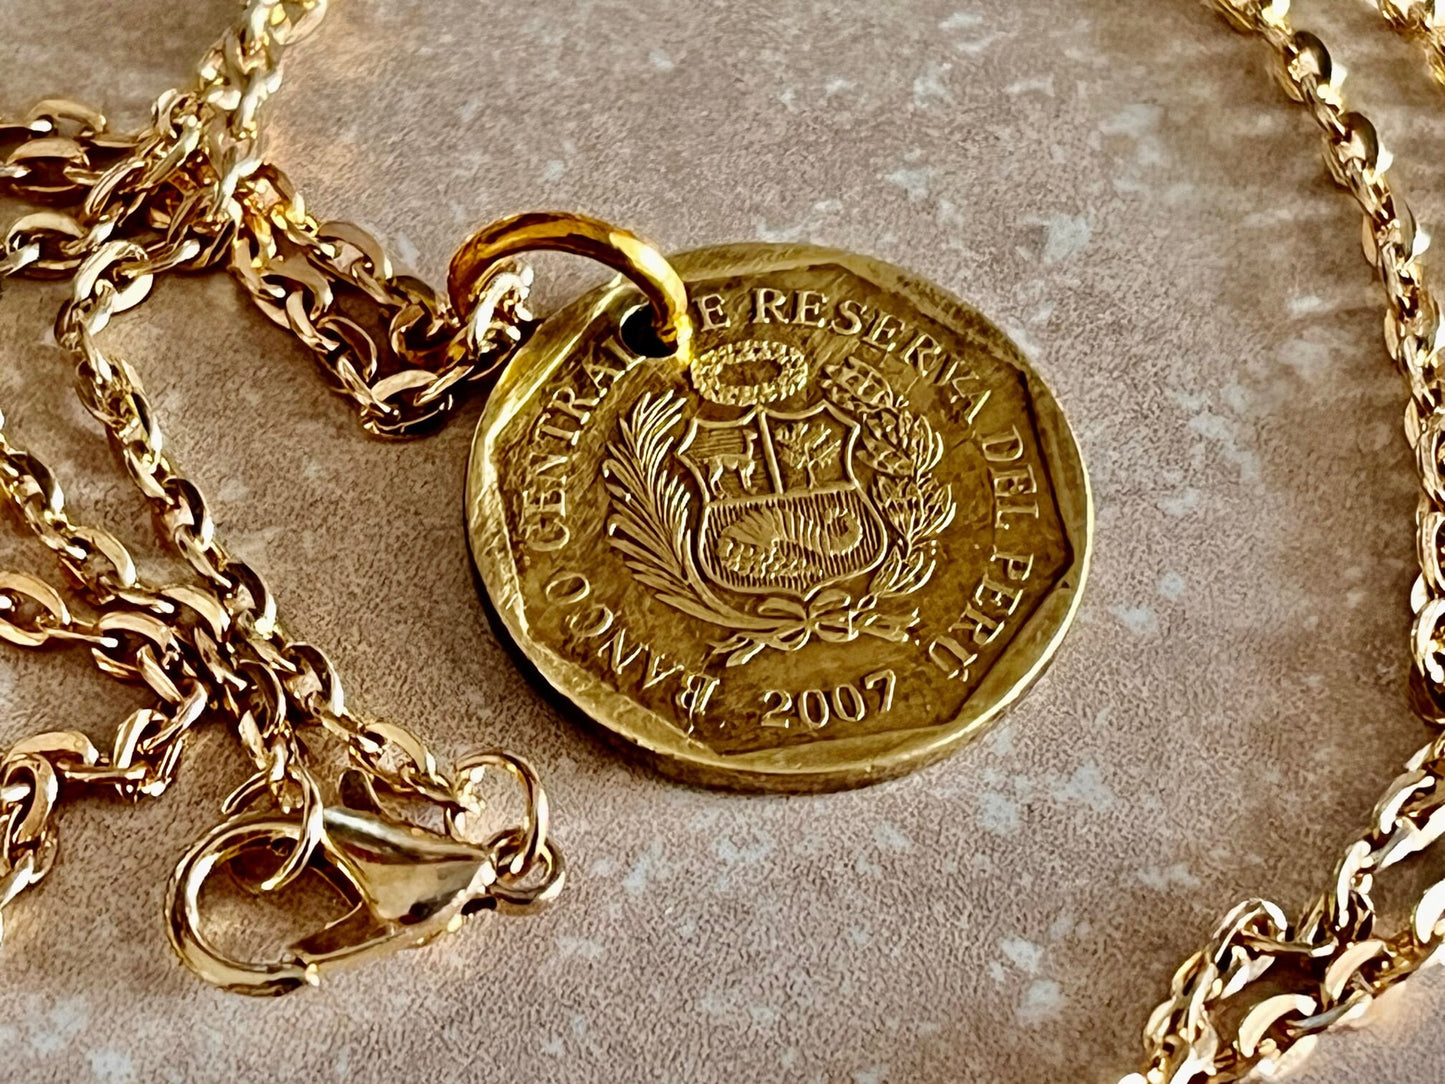 Peru Coin Pendant Peruvian 10 Centimos De Oro Personal Necklace Old Vintage Handmade Jewelry Gift Friend For Him Her World Coin Collector